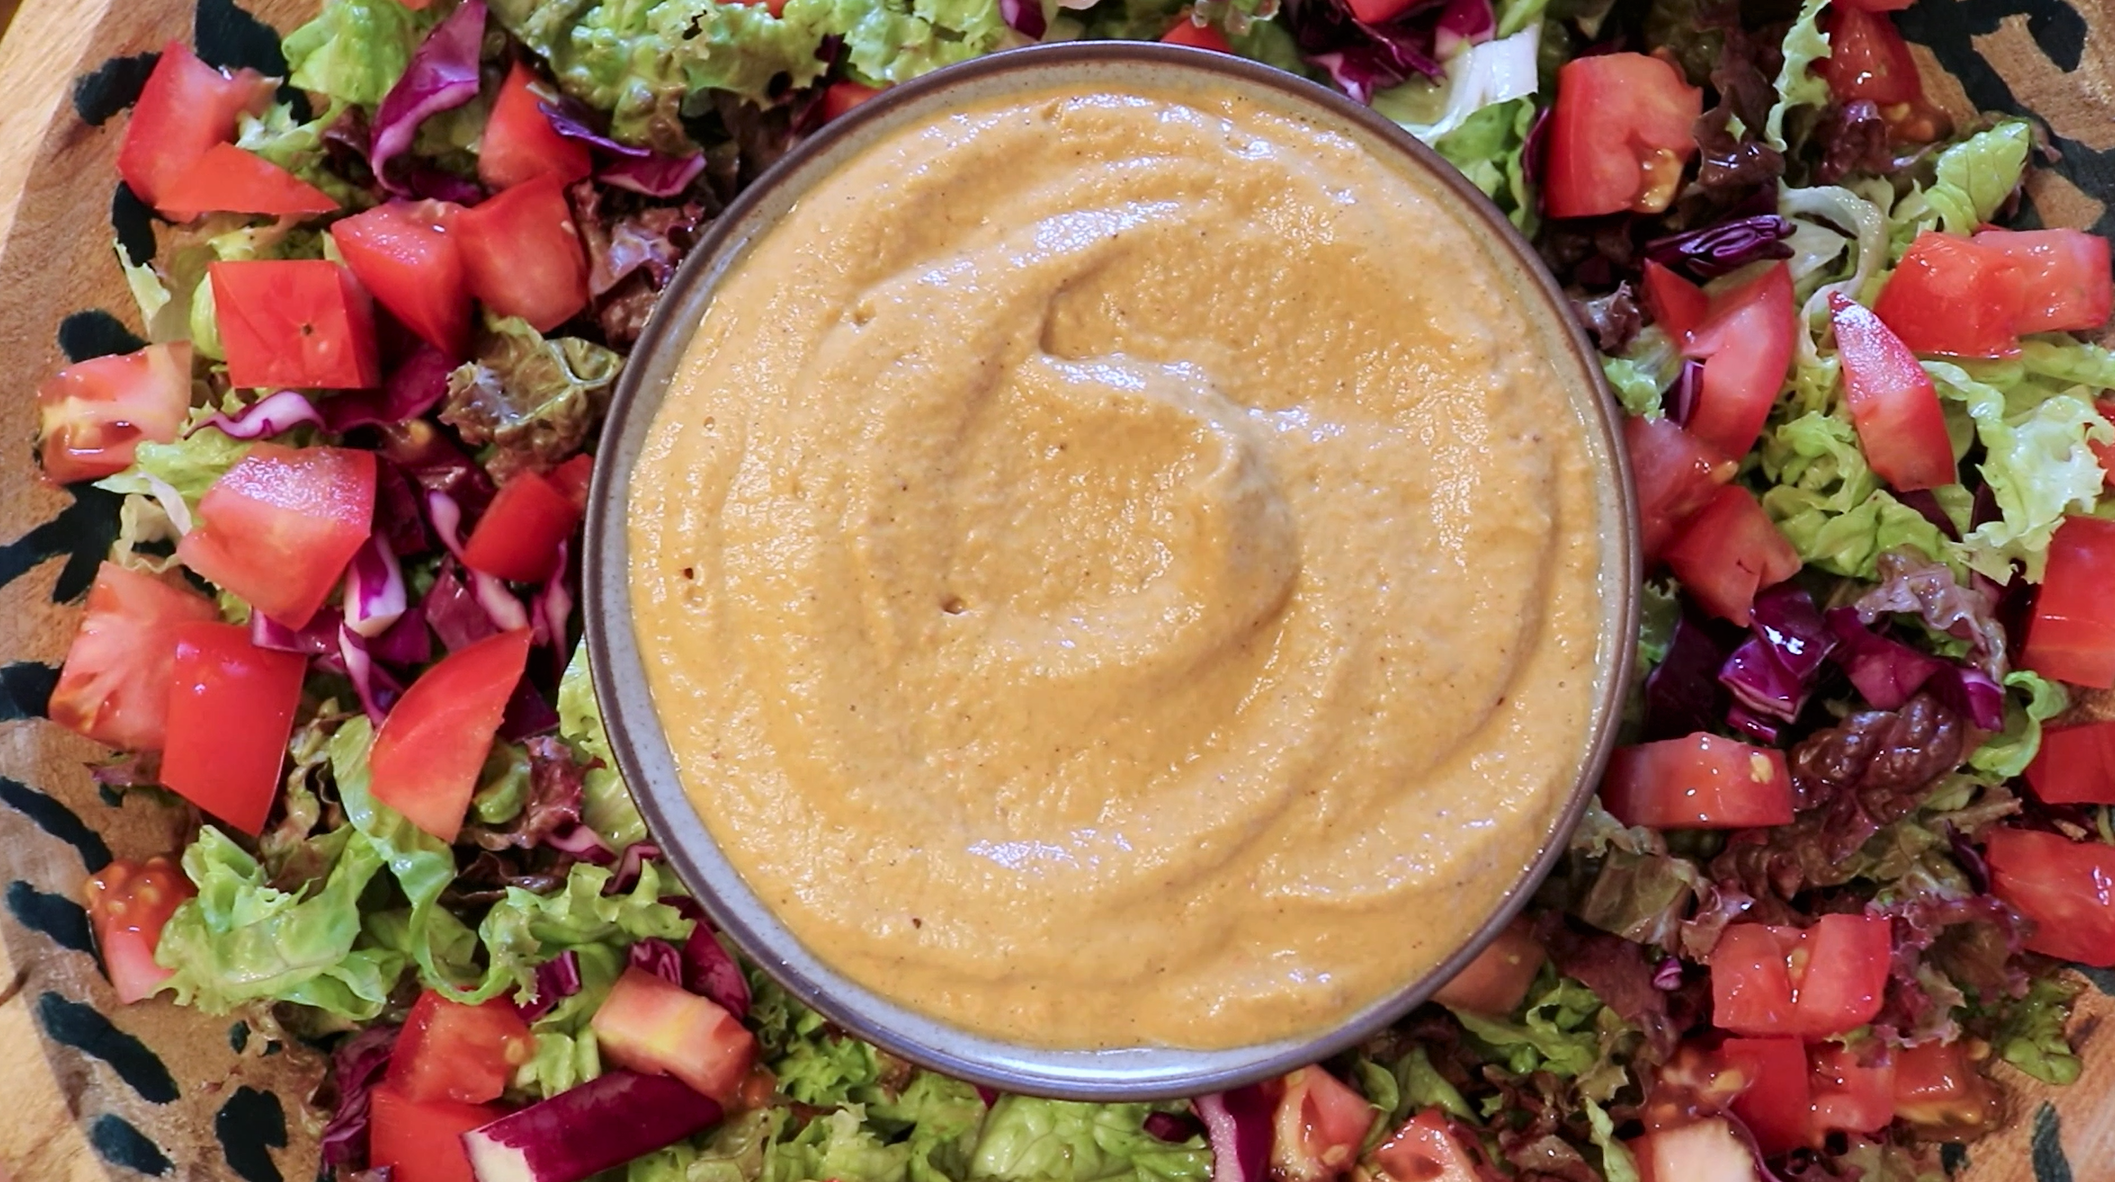 Sundried Tomato Red Pepper Salad Dressing | No Salt Added & Low Fat Raw Vegan | Cultivator Kitchen